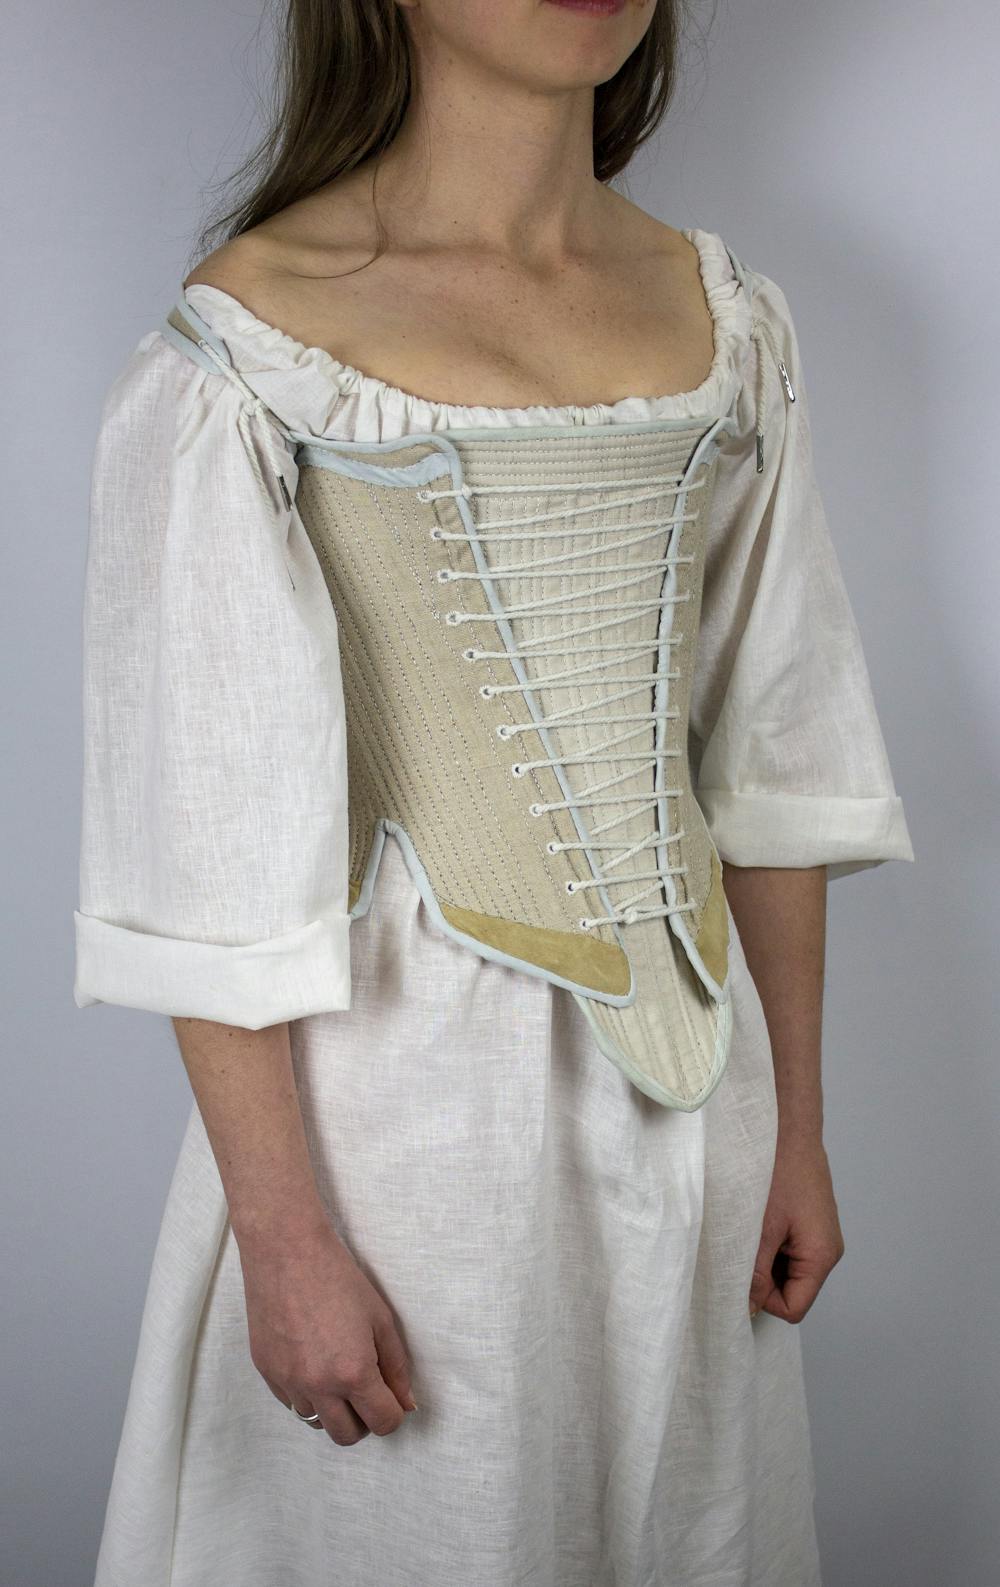 Remaking history: in hand-making 400-year-old corset designs, I